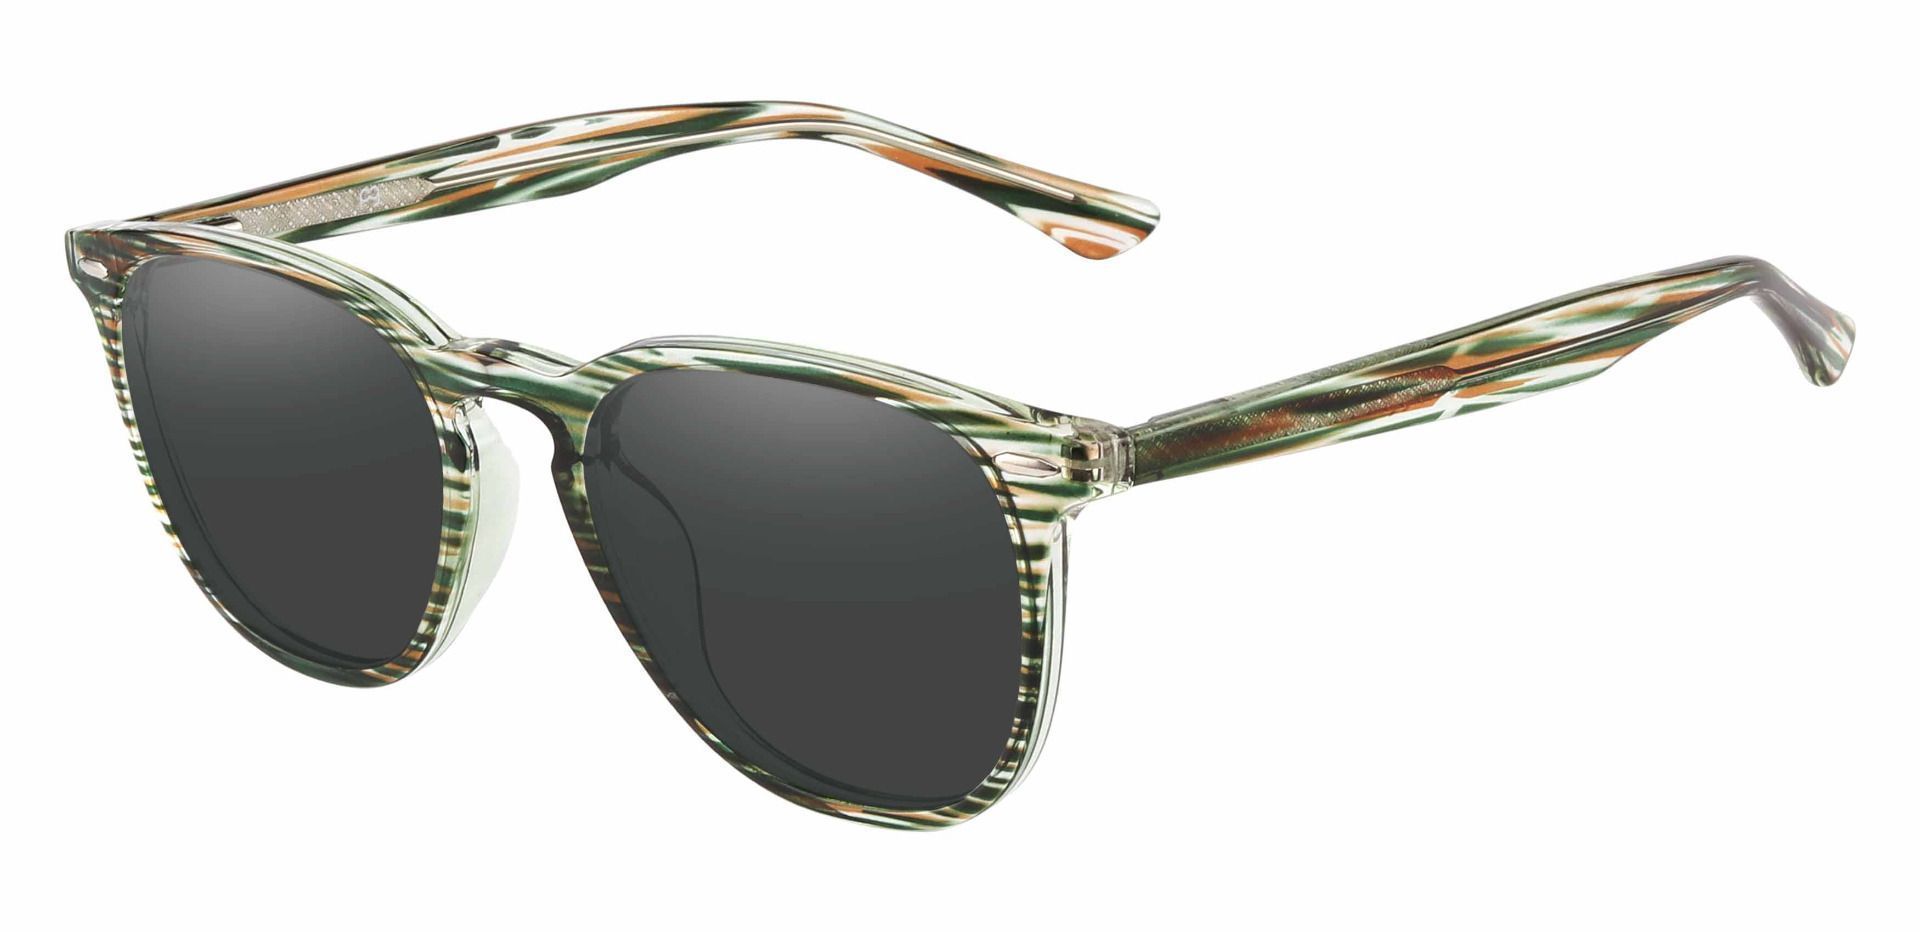 Sycamore Oval Non-Rx Sunglasses - Green Frame With Gray Lenses